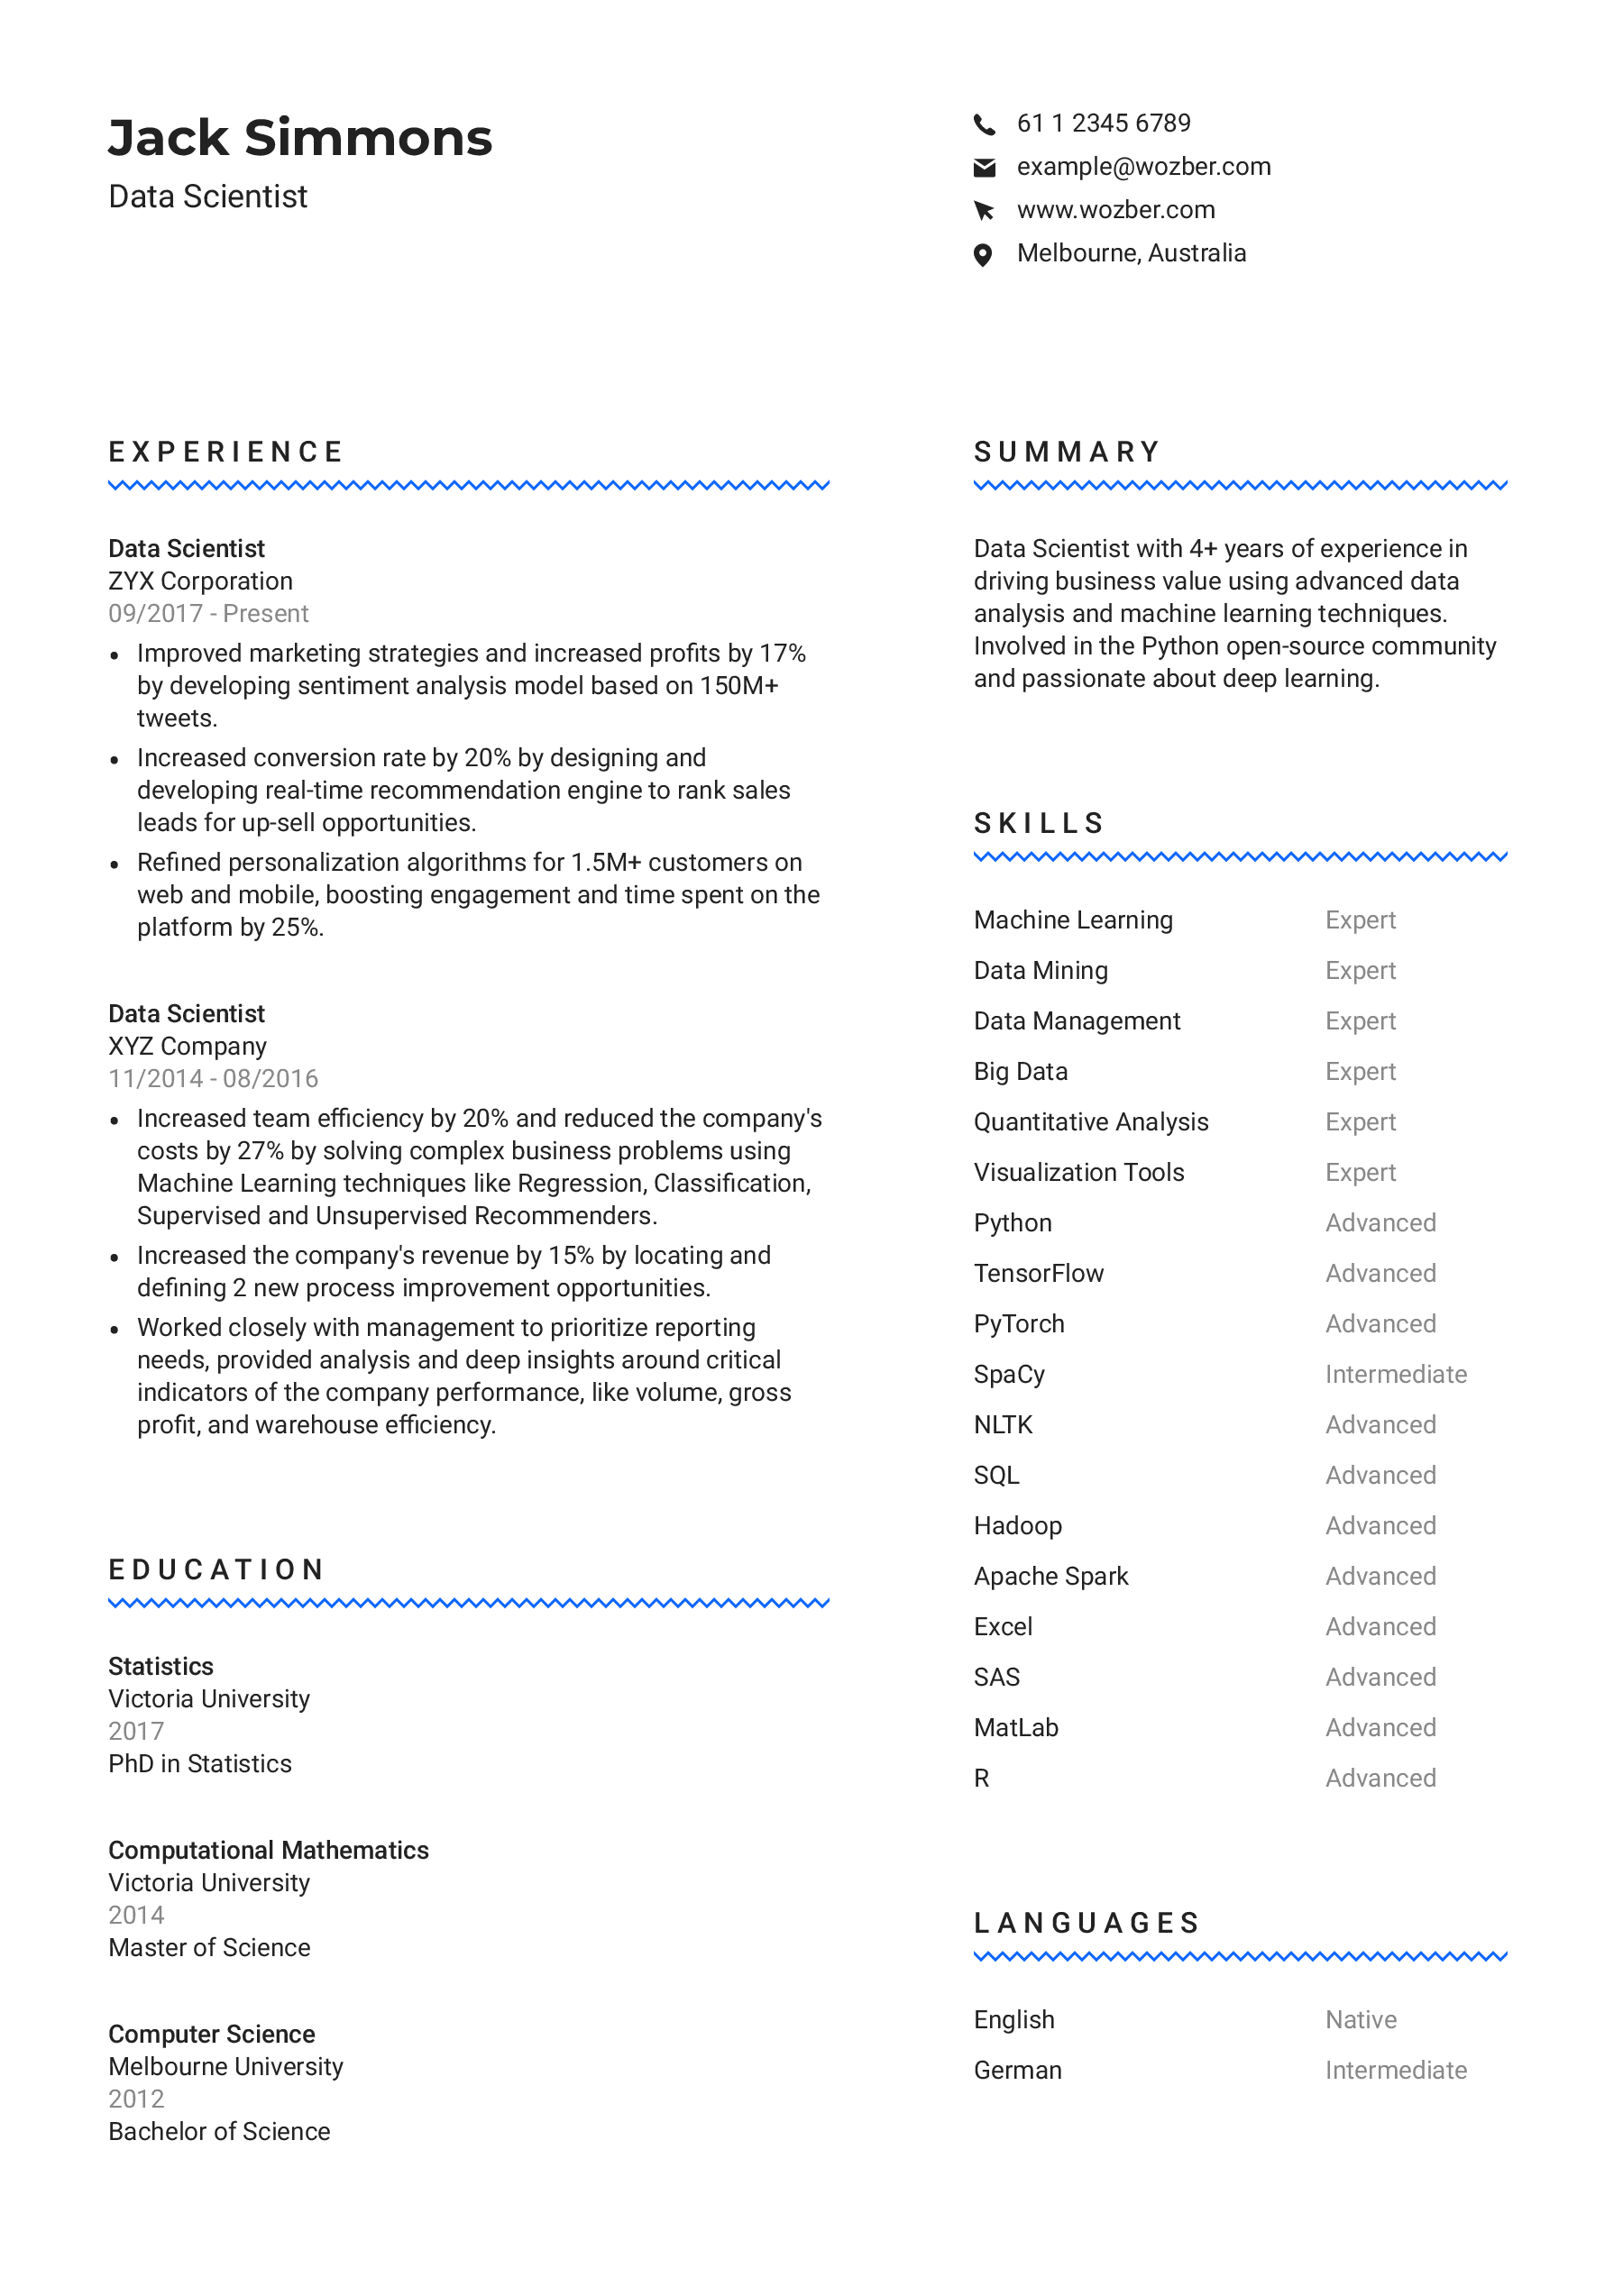 Modern resume example for Data Scientist position